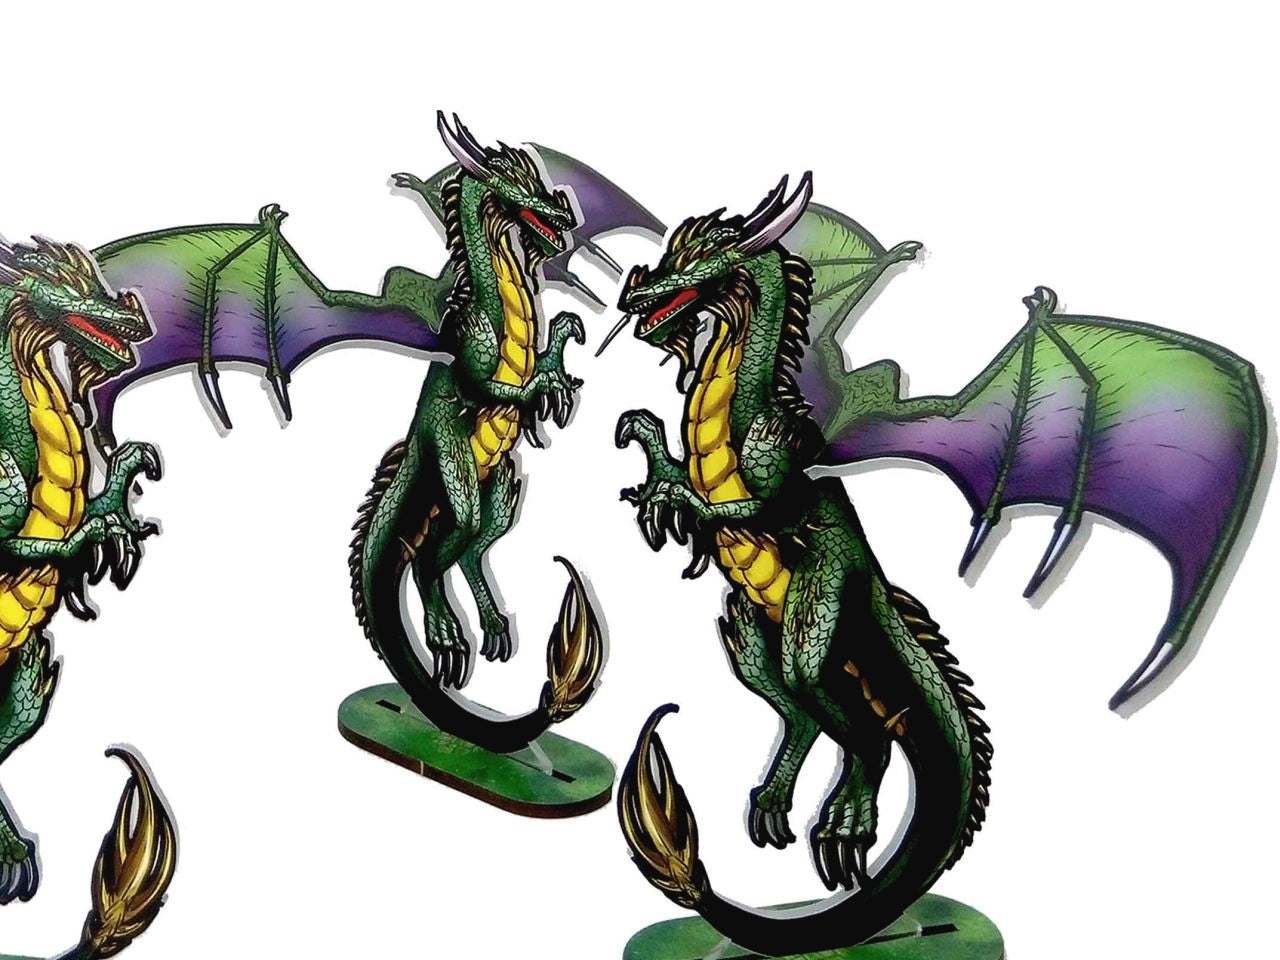 Green Dragons (The Rampart)